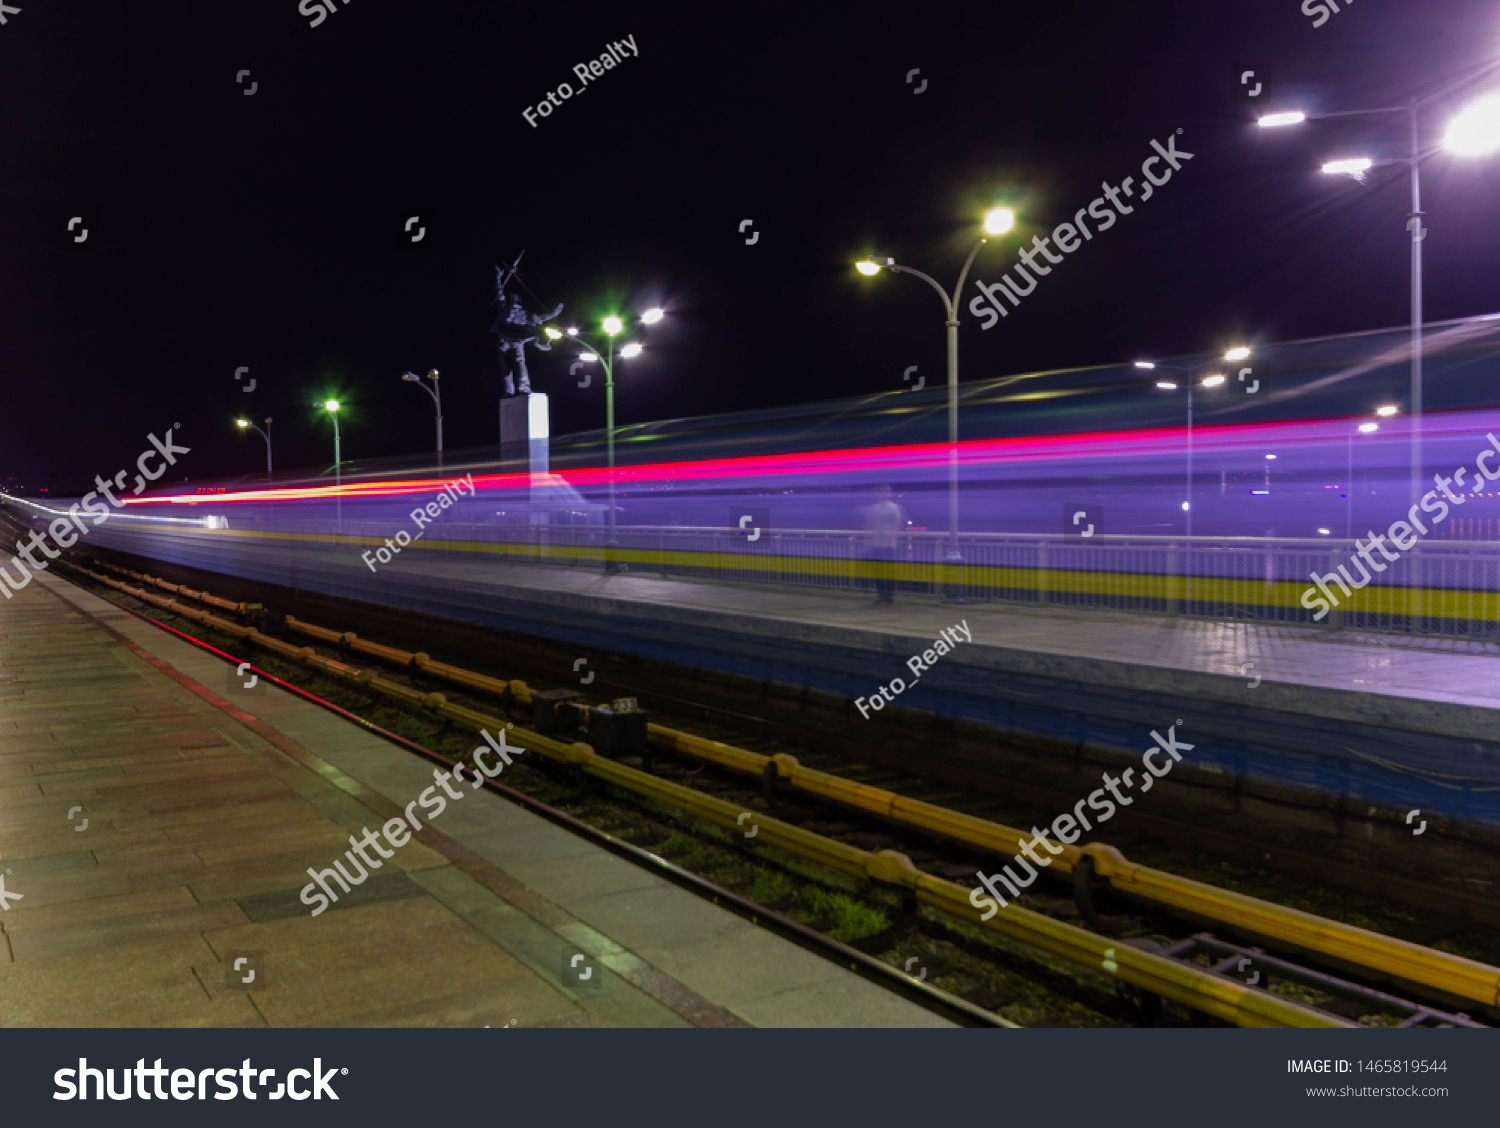 Colorful Underground Subway Train with motion blur #1465819544